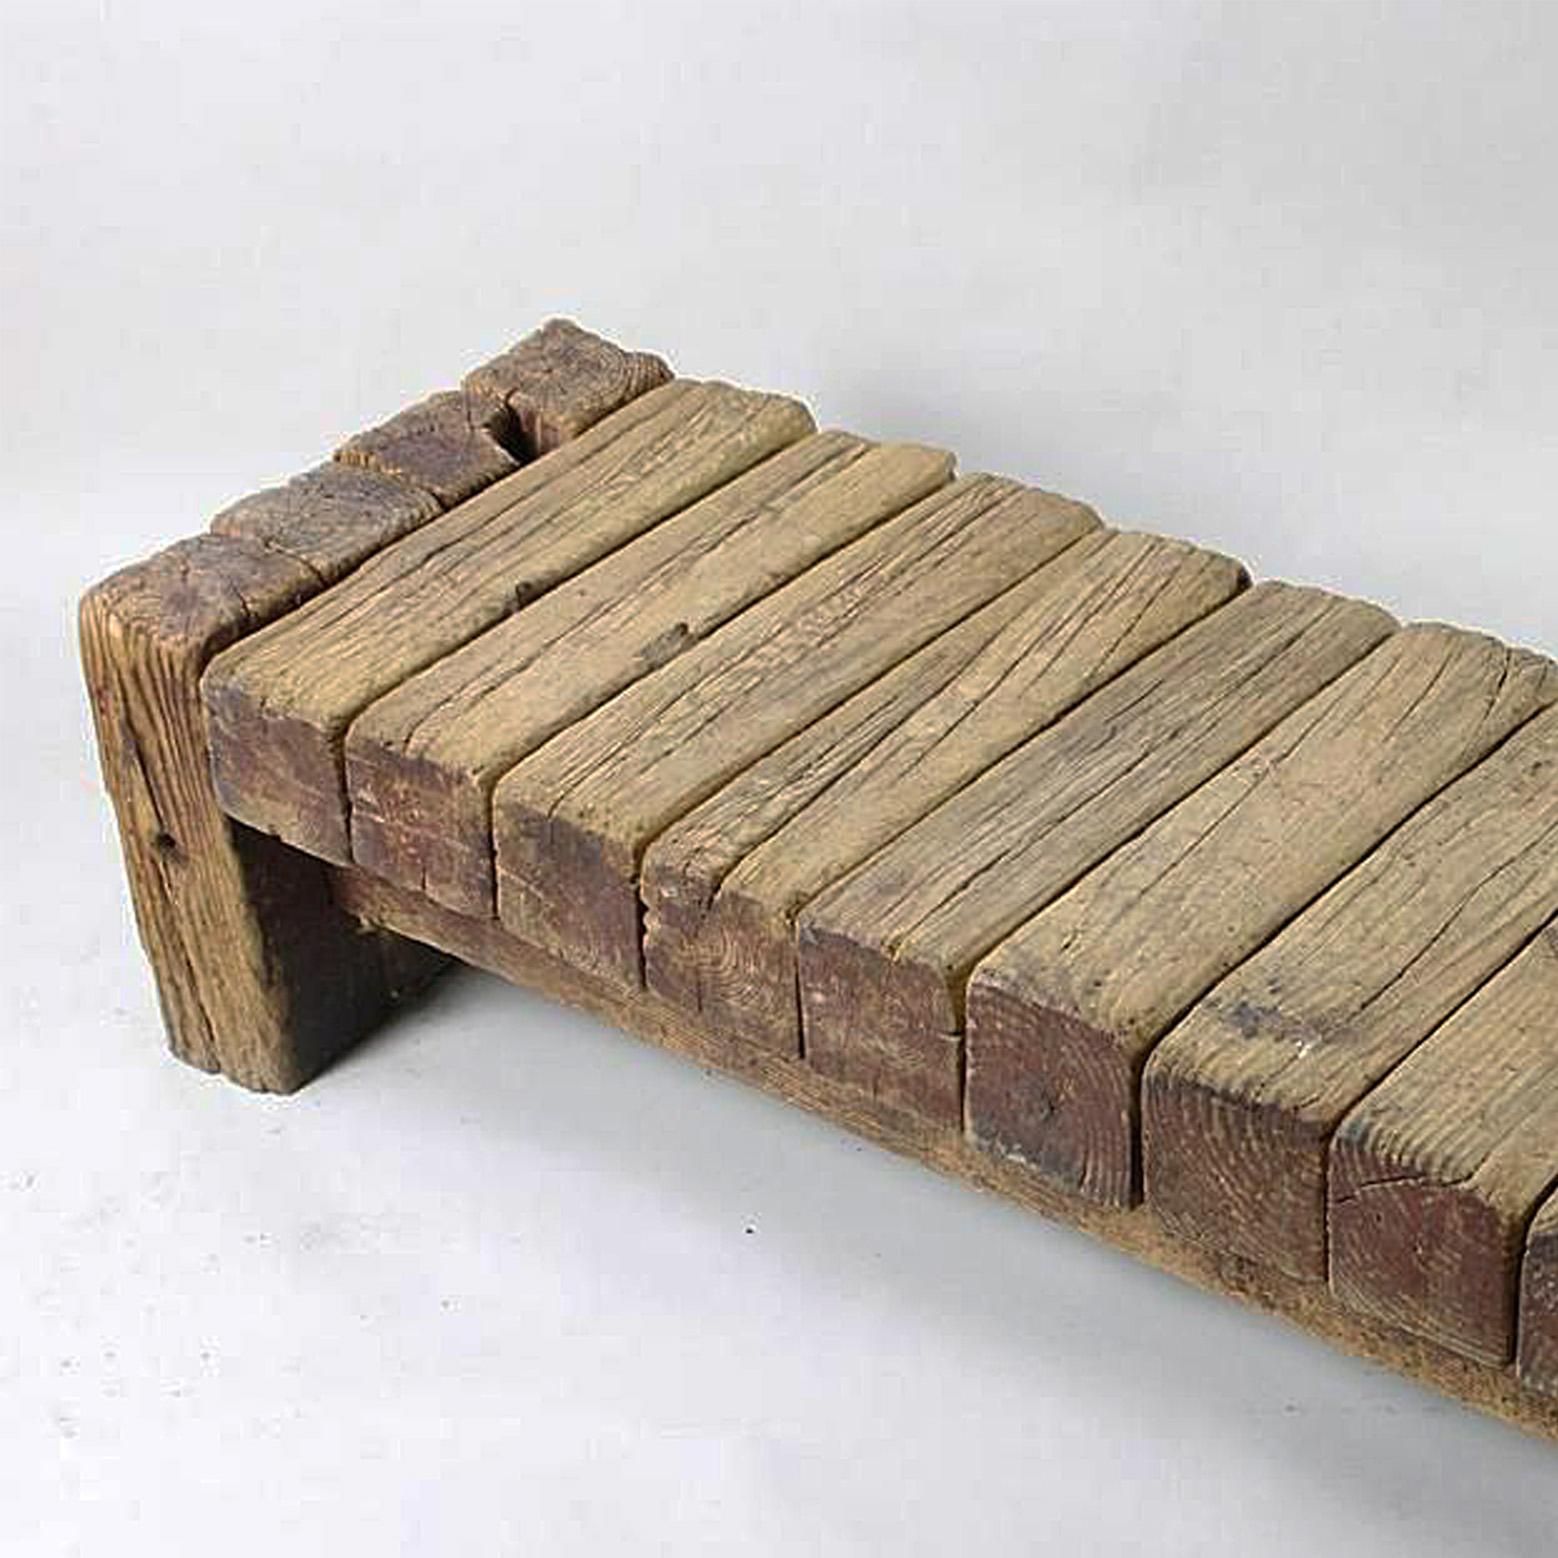 Mid-20th Century American Unusual Large Solid Pine Bench Made of Squared Logs 1960s / 1970s For Sale